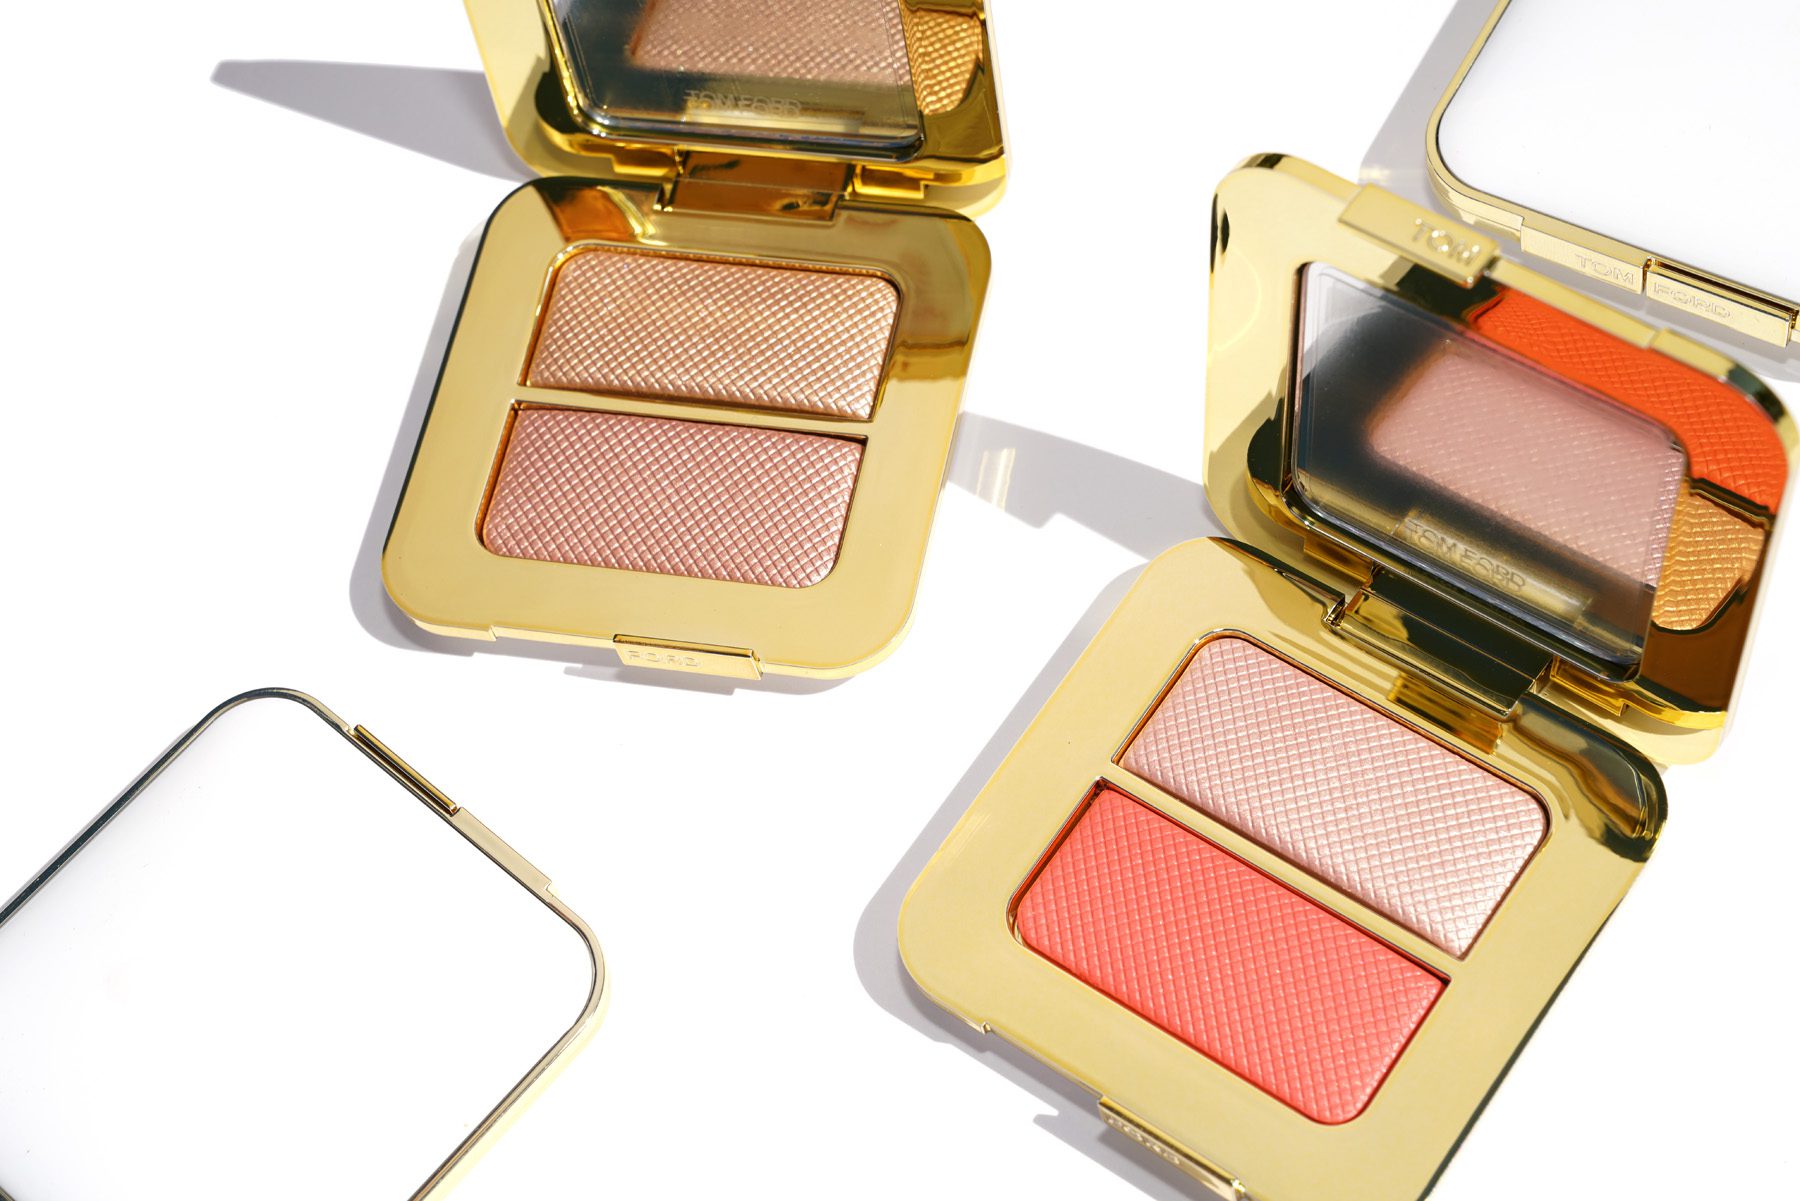 Tom Ford Soleil Collection - Terra and Bronze Age Bronzing Powders